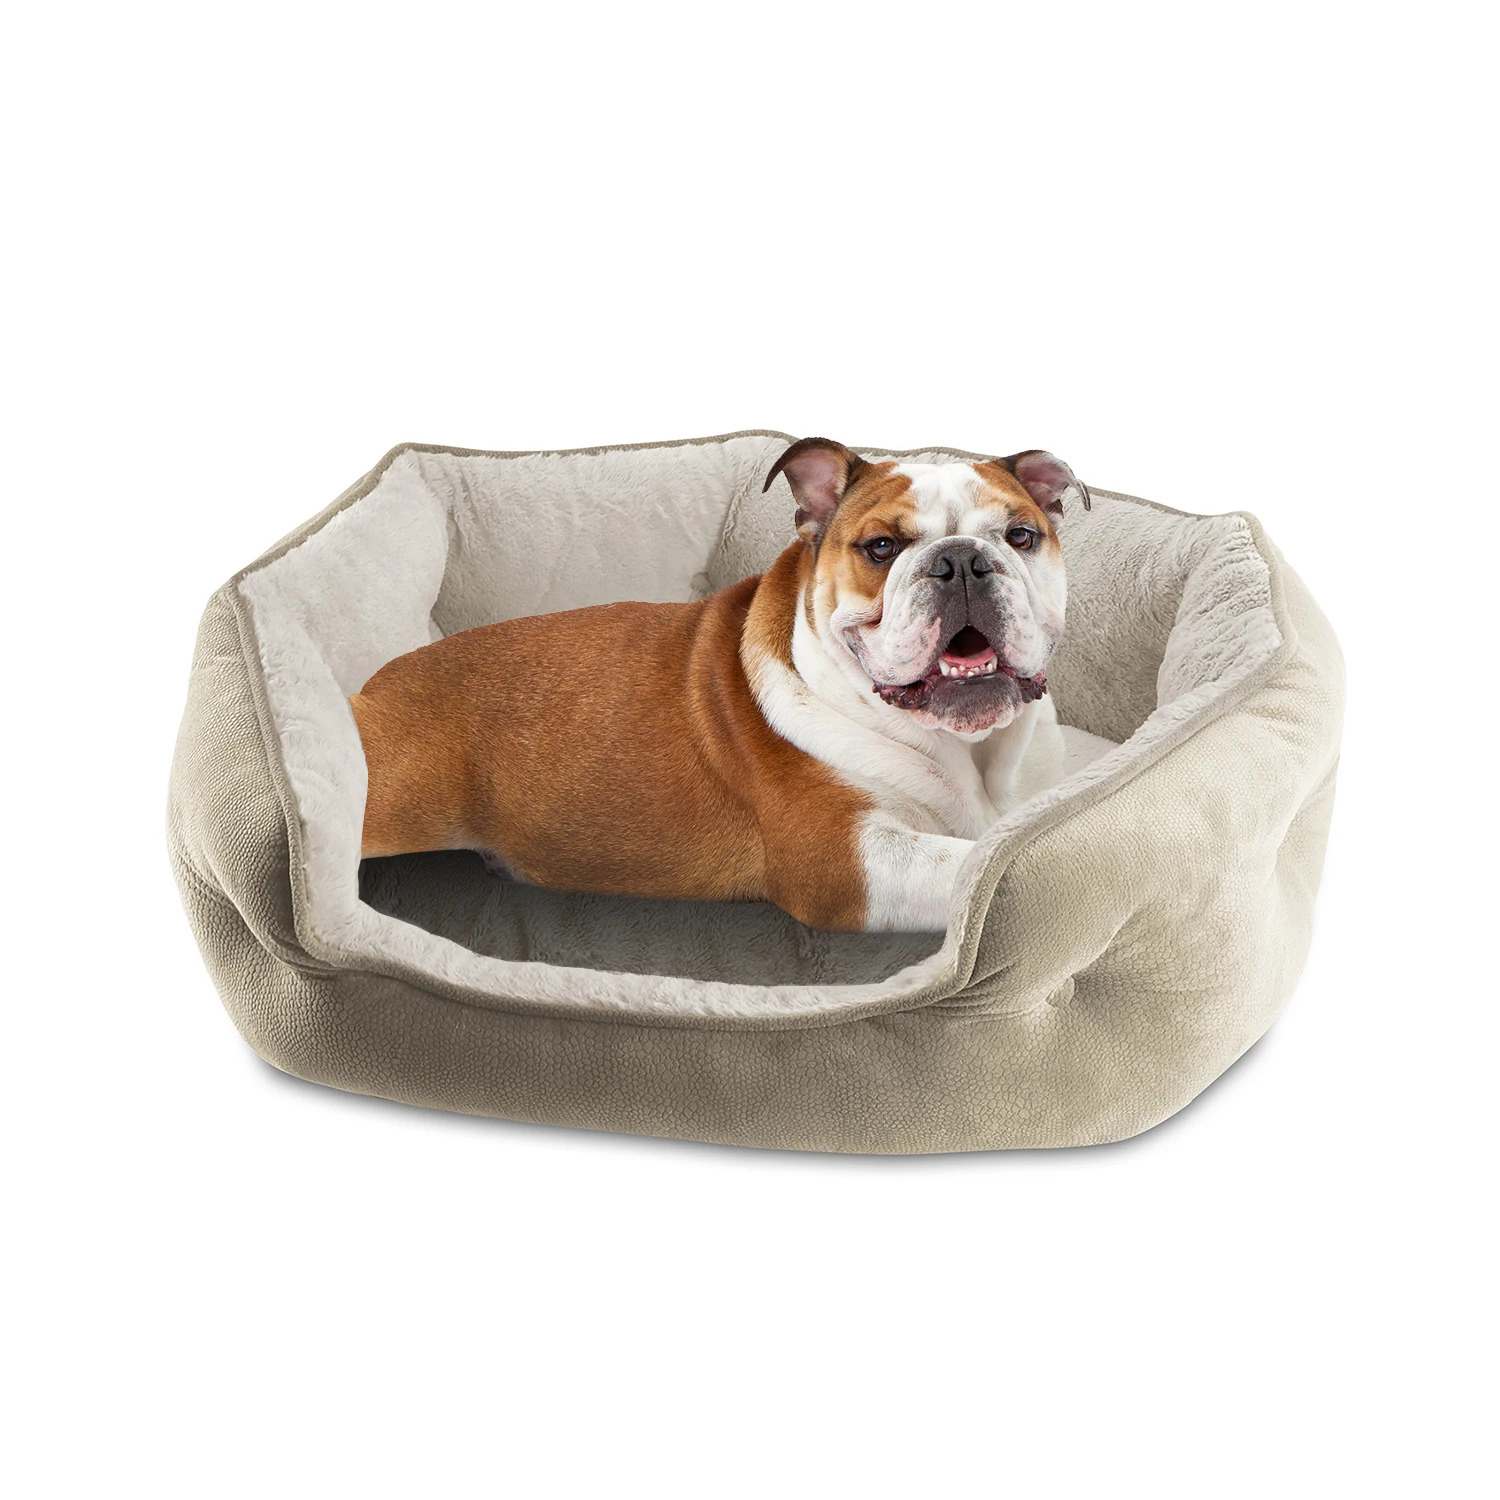 

HMTX Arlee Cozy Oval Round Cuddler Dog Bed - Memory Foam - Chew Resistant - Medium, Large (choose your color)